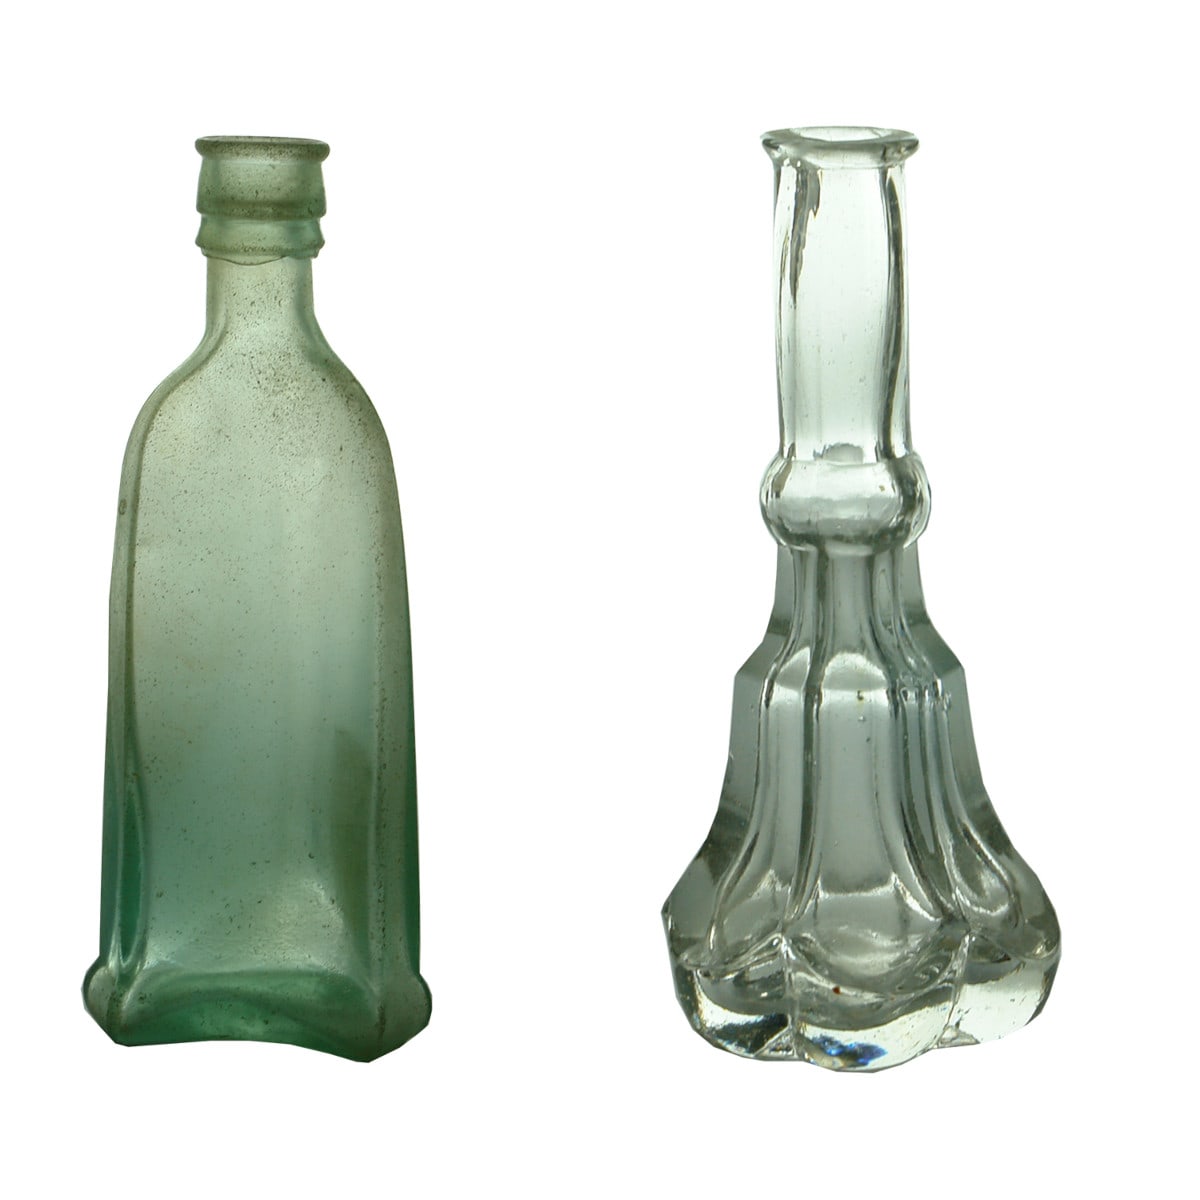 Pair of Goldfields era Bottles: 1. Sauce. Triangular with chamfered edges. Round pontil scar. 2. Fancy facetted Crosse & Blackwell type. Clear Flint glass.